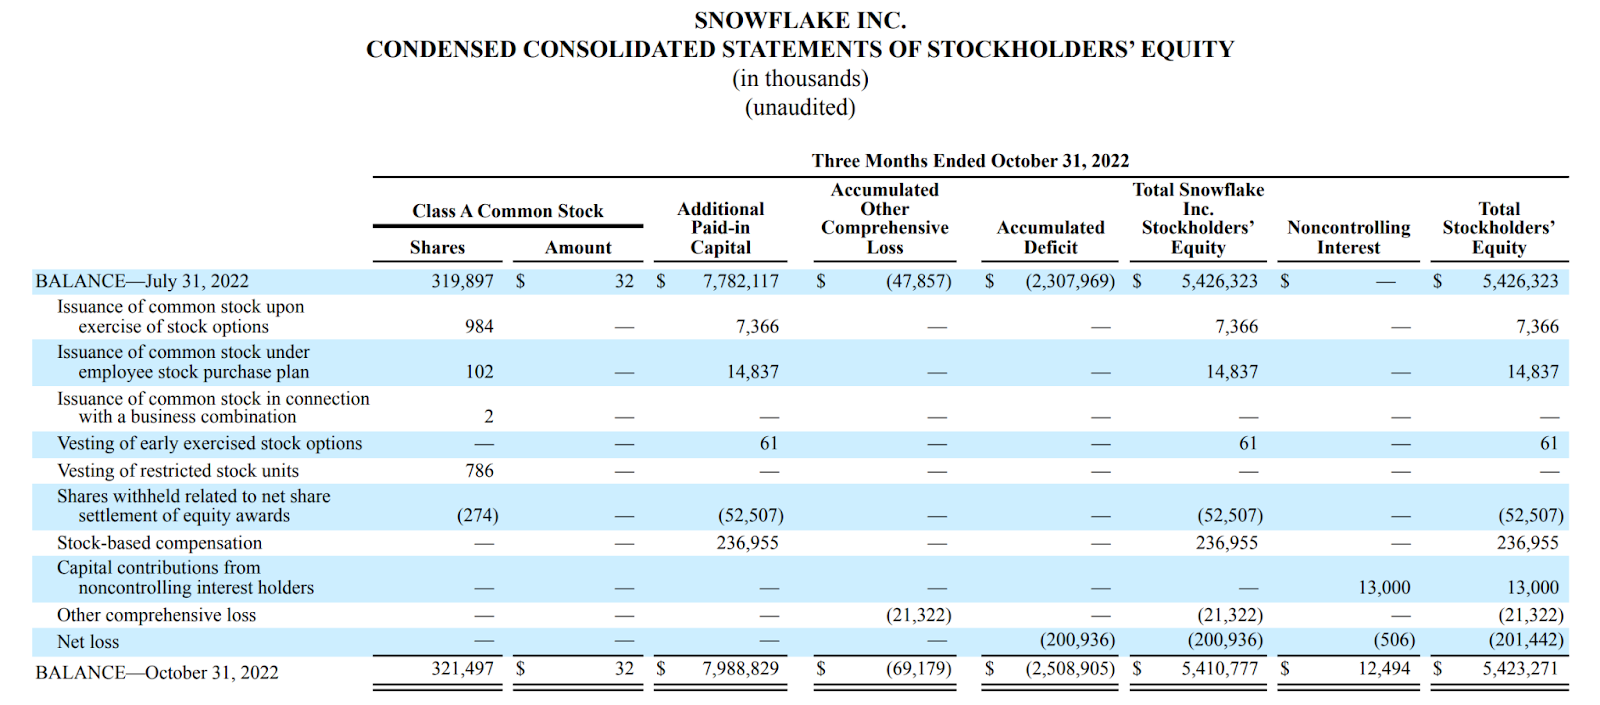 Example statement of stockholders' equity from Snowflake